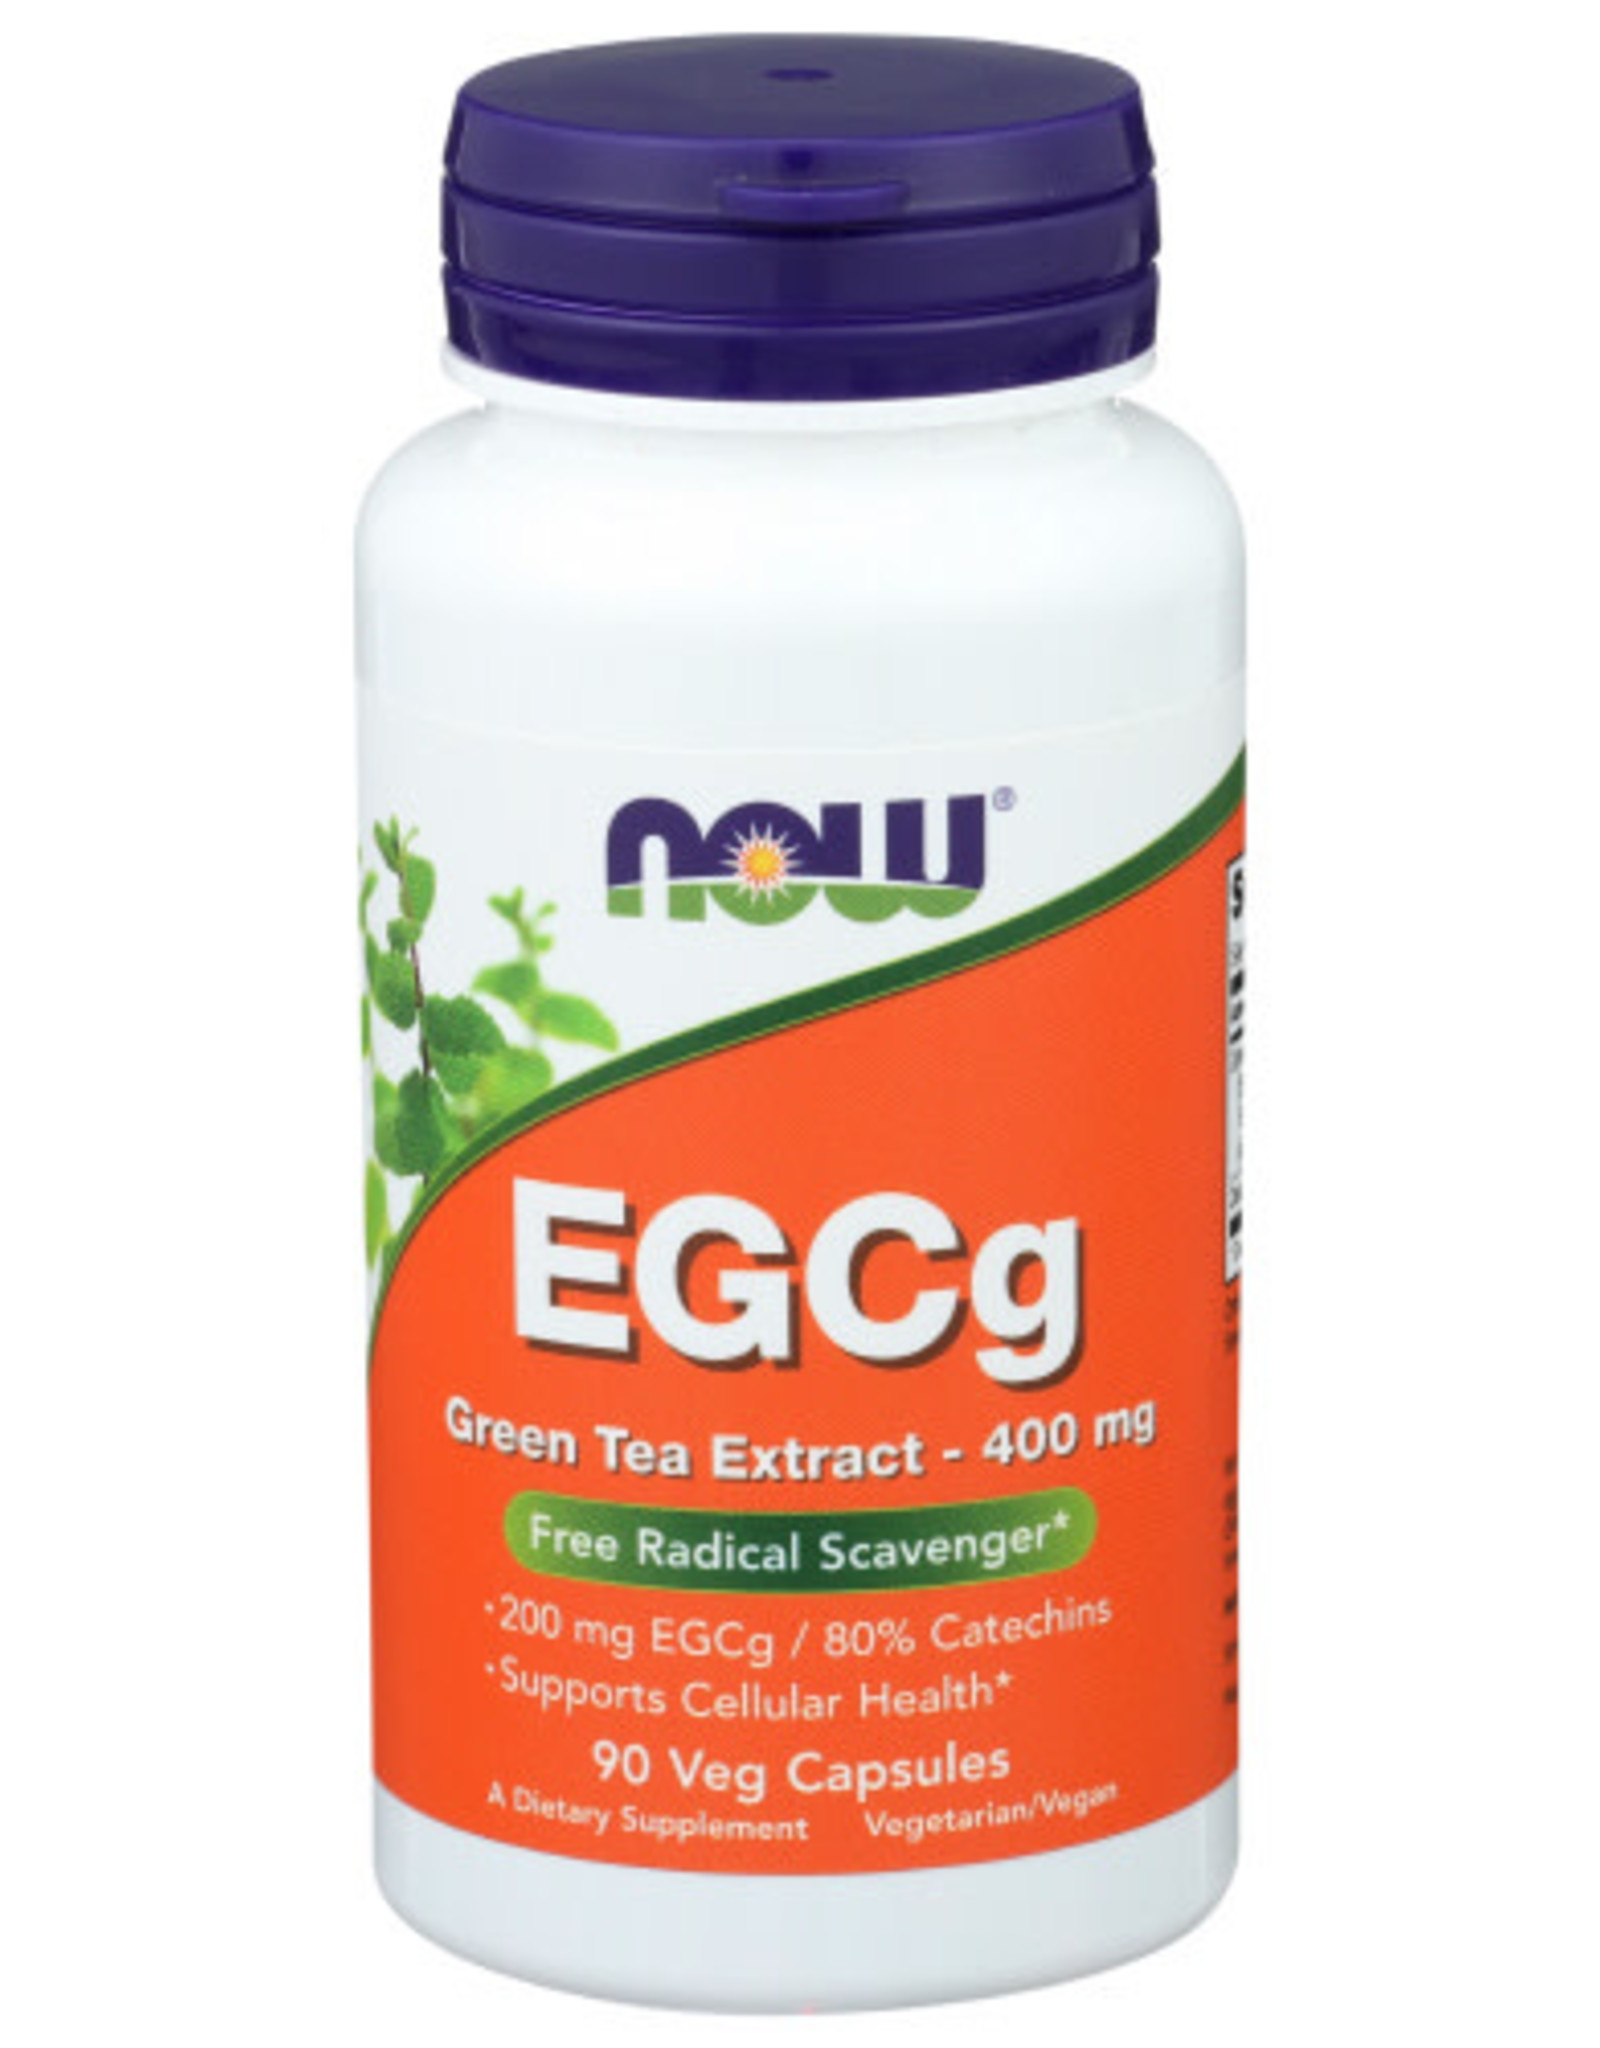 NOW® NOW FOODS EGCG GREEN TEA EXTRACT 400 MG., 90 CAPSULES